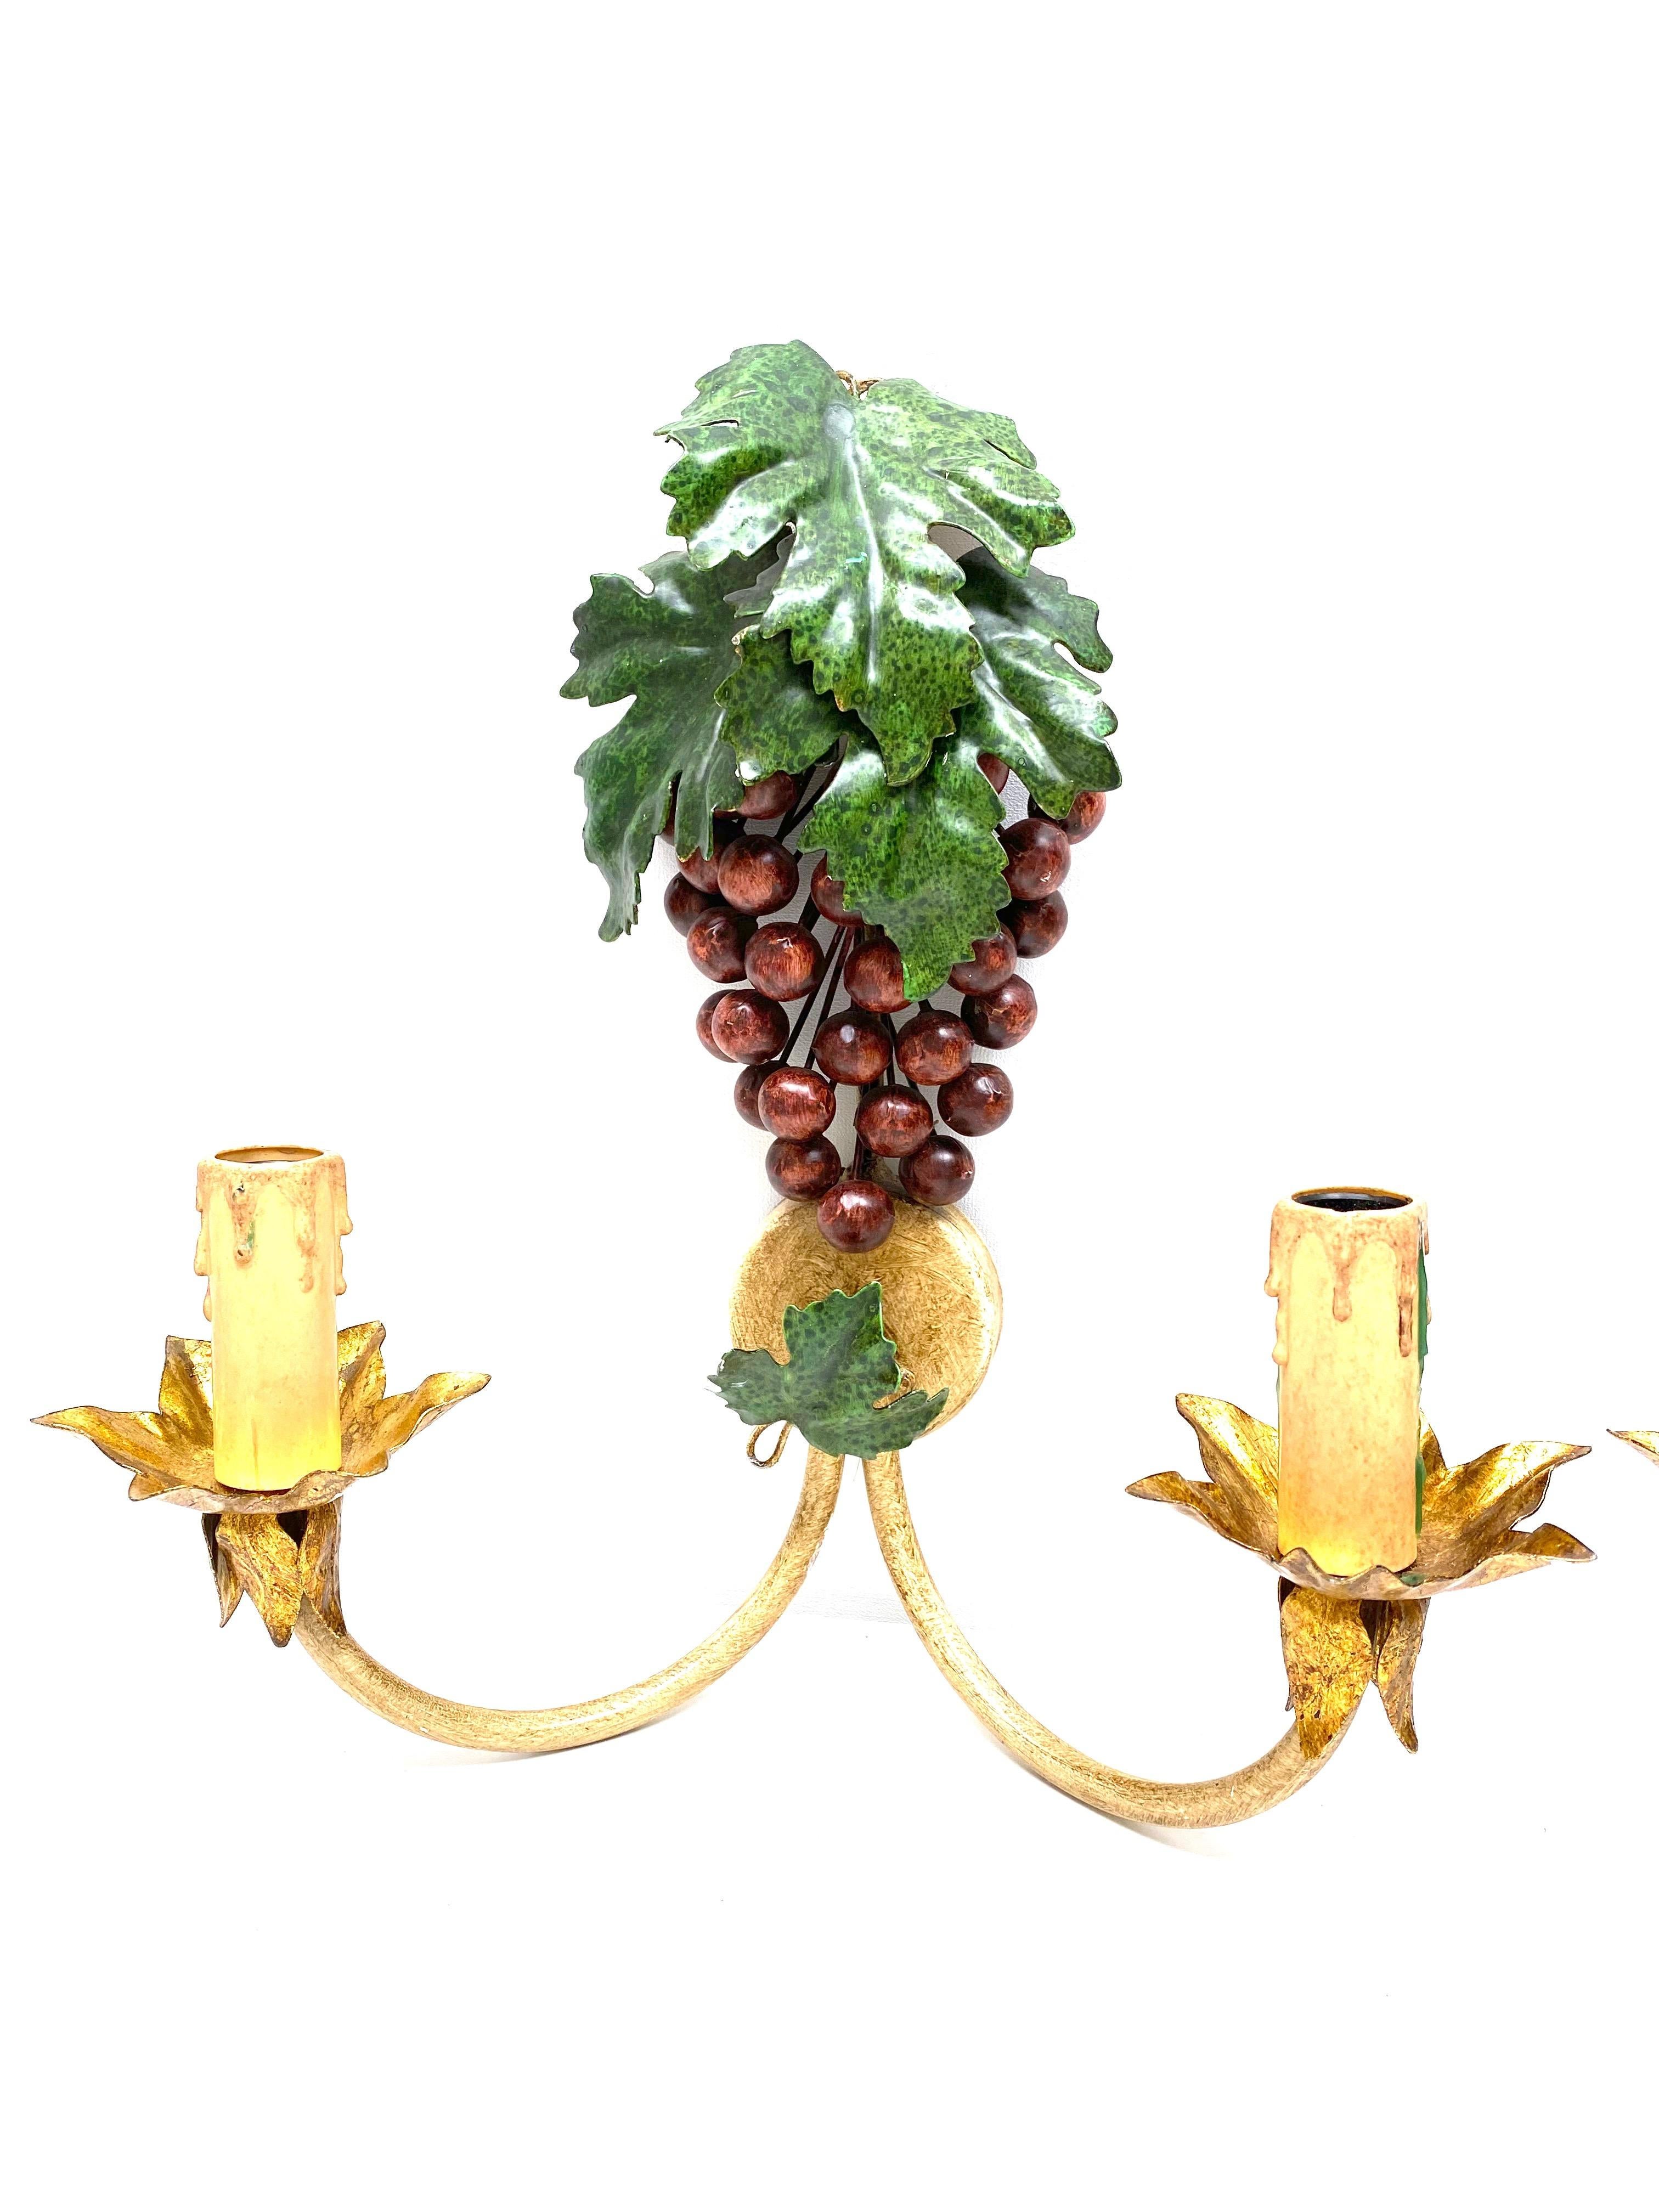 Hollywood Regency Pair of Grape and Leaf Tole Sconces Polychrome Metal, 1960s, Italy For Sale